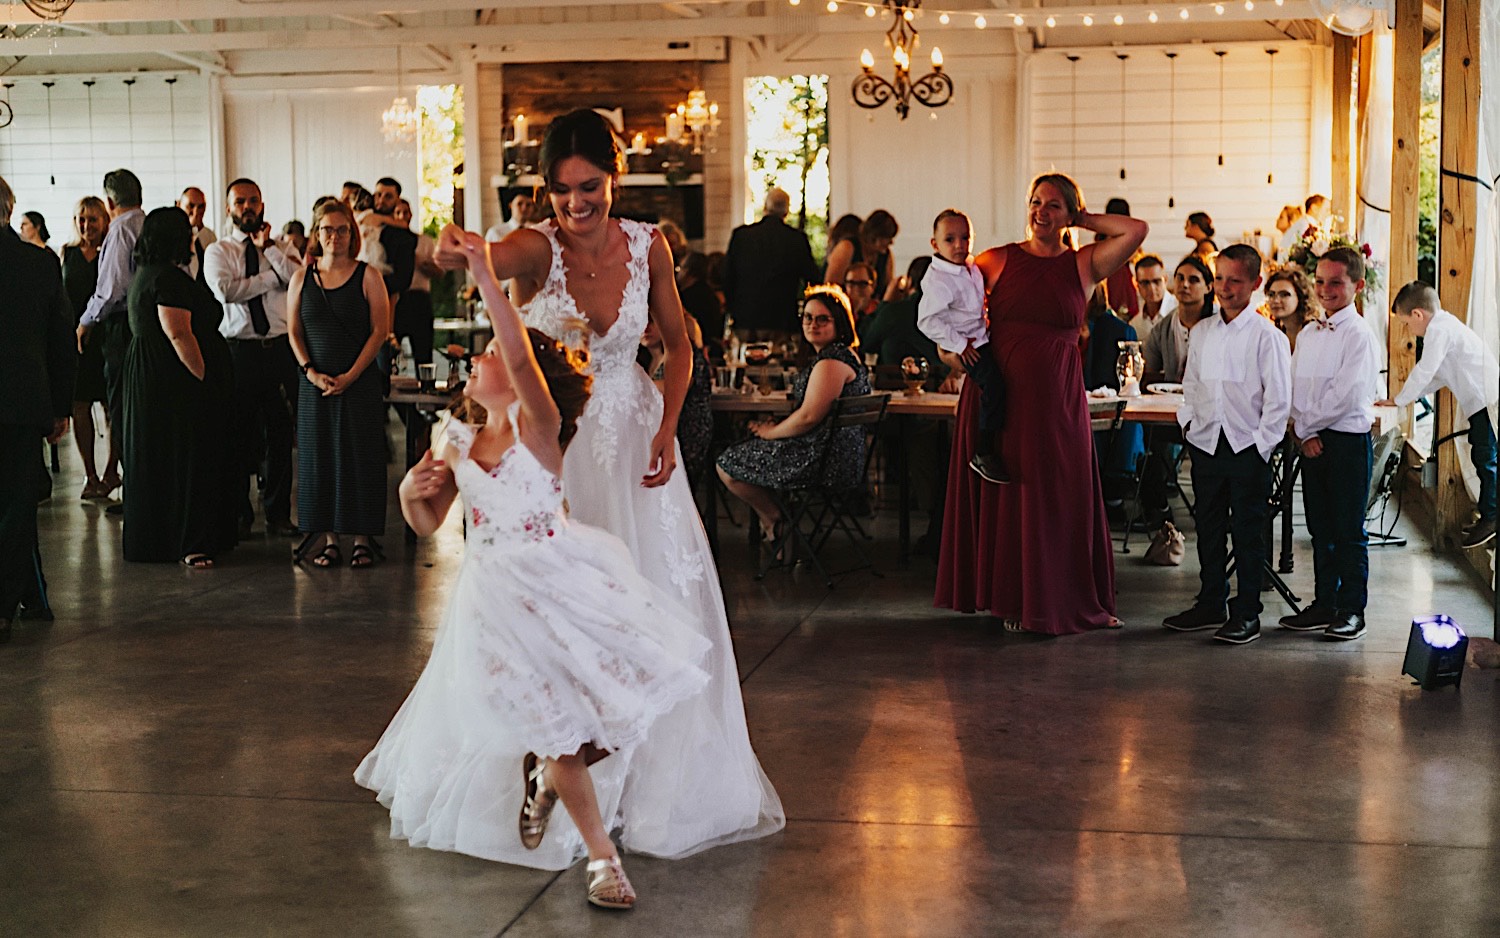 A bride dances with a young girl during an indoor wedding reception at Legacy Hill Farm